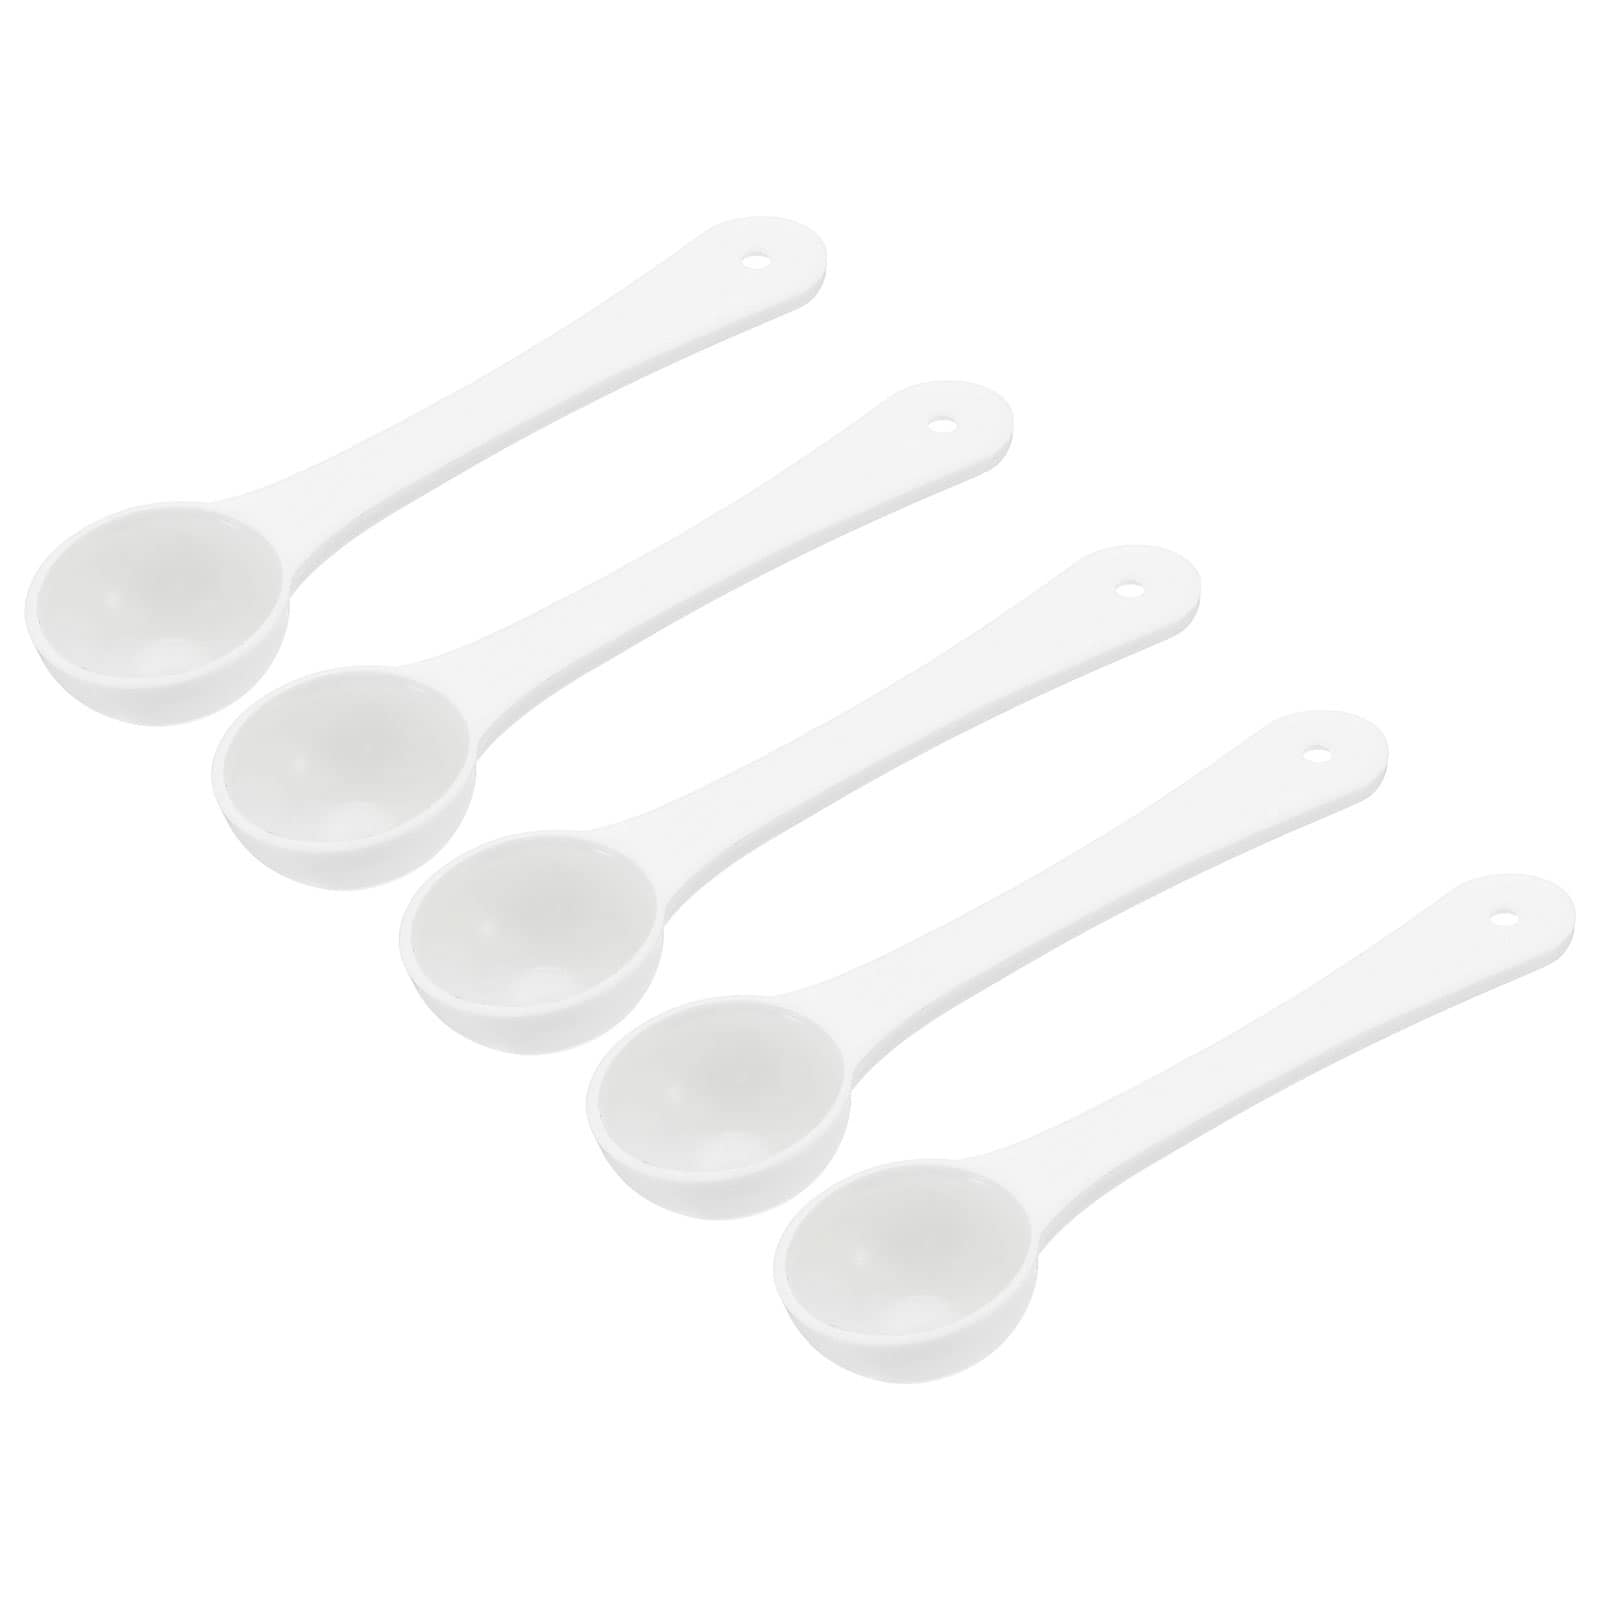 https://ak1.ostkcdn.com/images/products/is/images/direct/af8f22d7d72c7e289e8d0c186baa858f4c86a986/Micro-Spoons-1-Gram-Measuring-Scoop-Plastic-Round-Bottom-with-Hanging-Hole-30Pcs.jpg